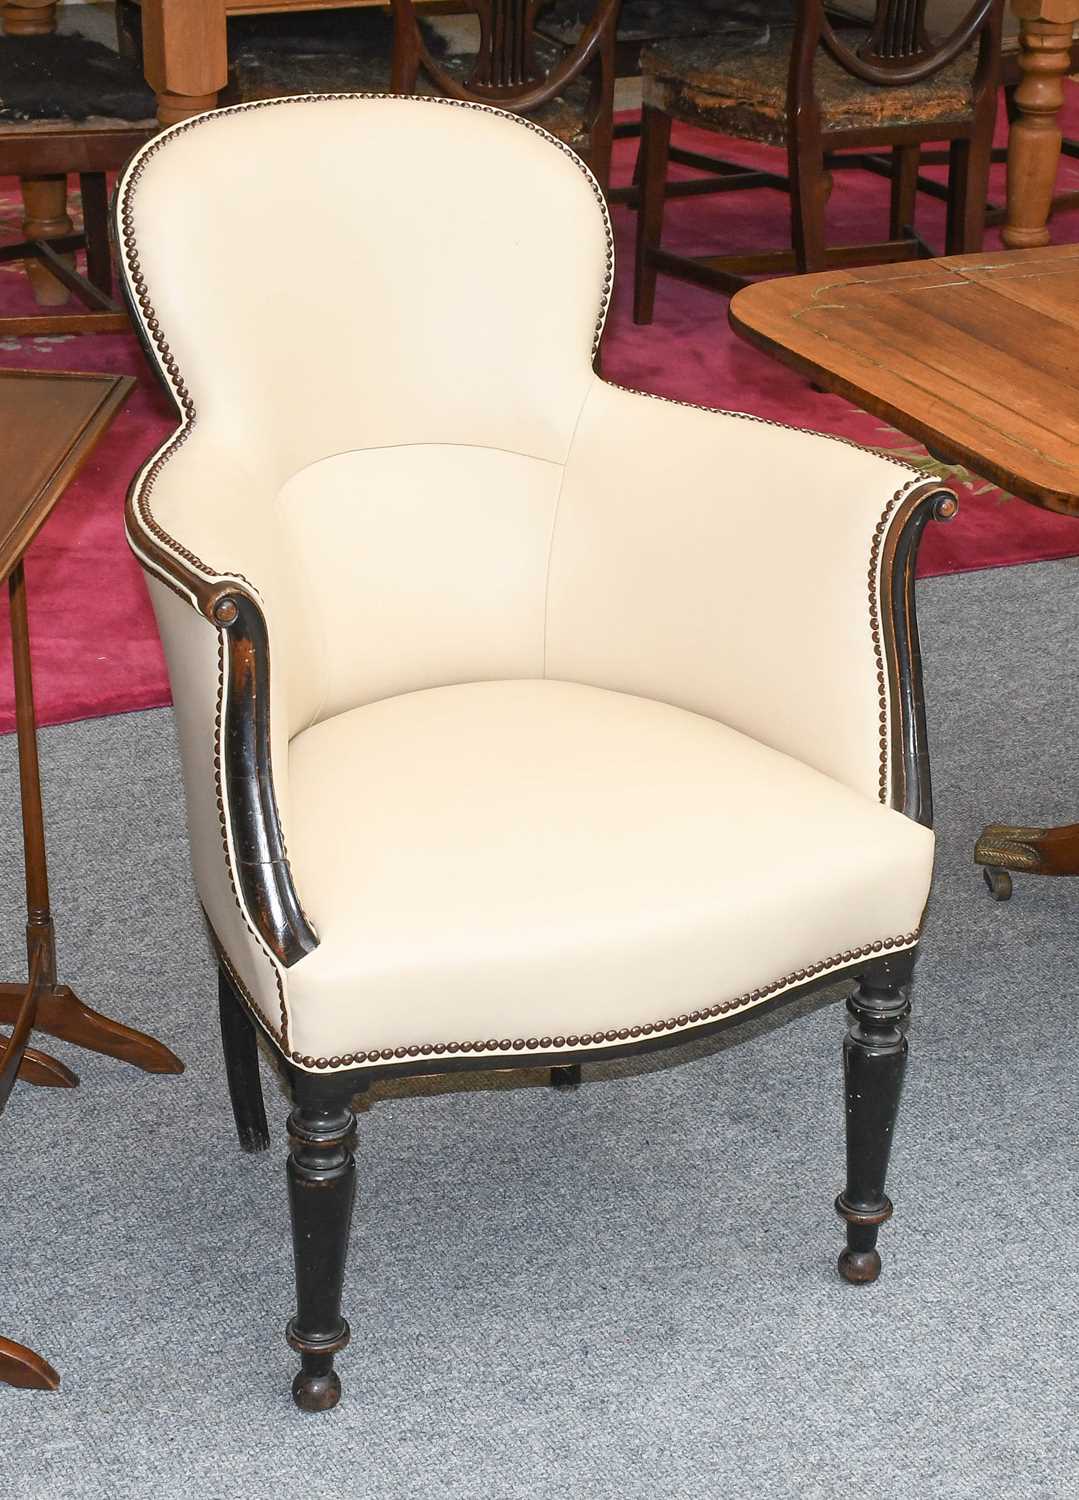 A 19th Century Mahogany Framed Armchair, with cream studded leather upholstery